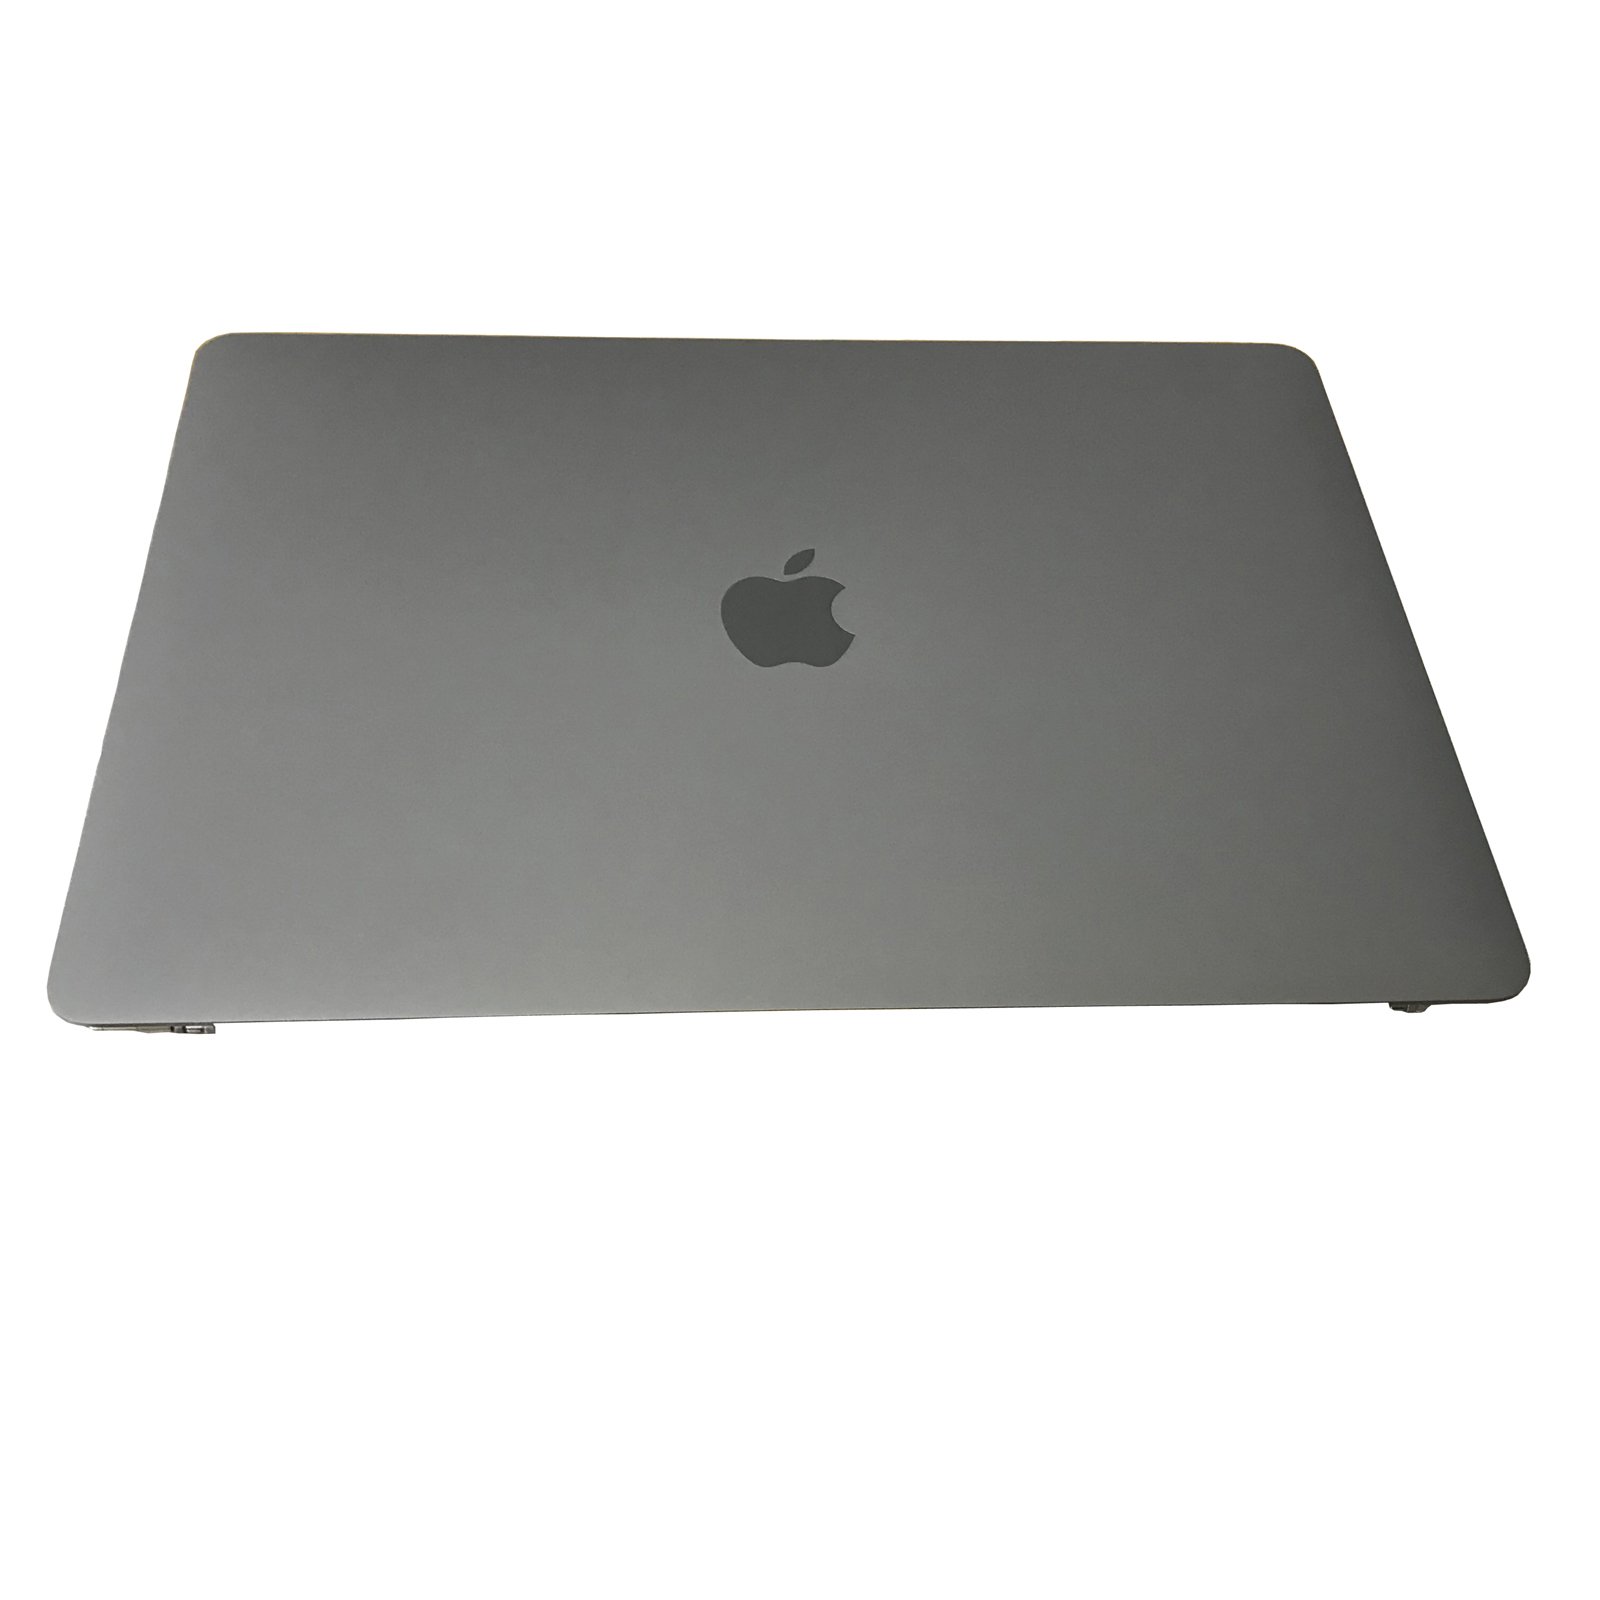 Screen / Display Panel for Apple MacBook Pro Retina A1708 2017 (Space Grey)